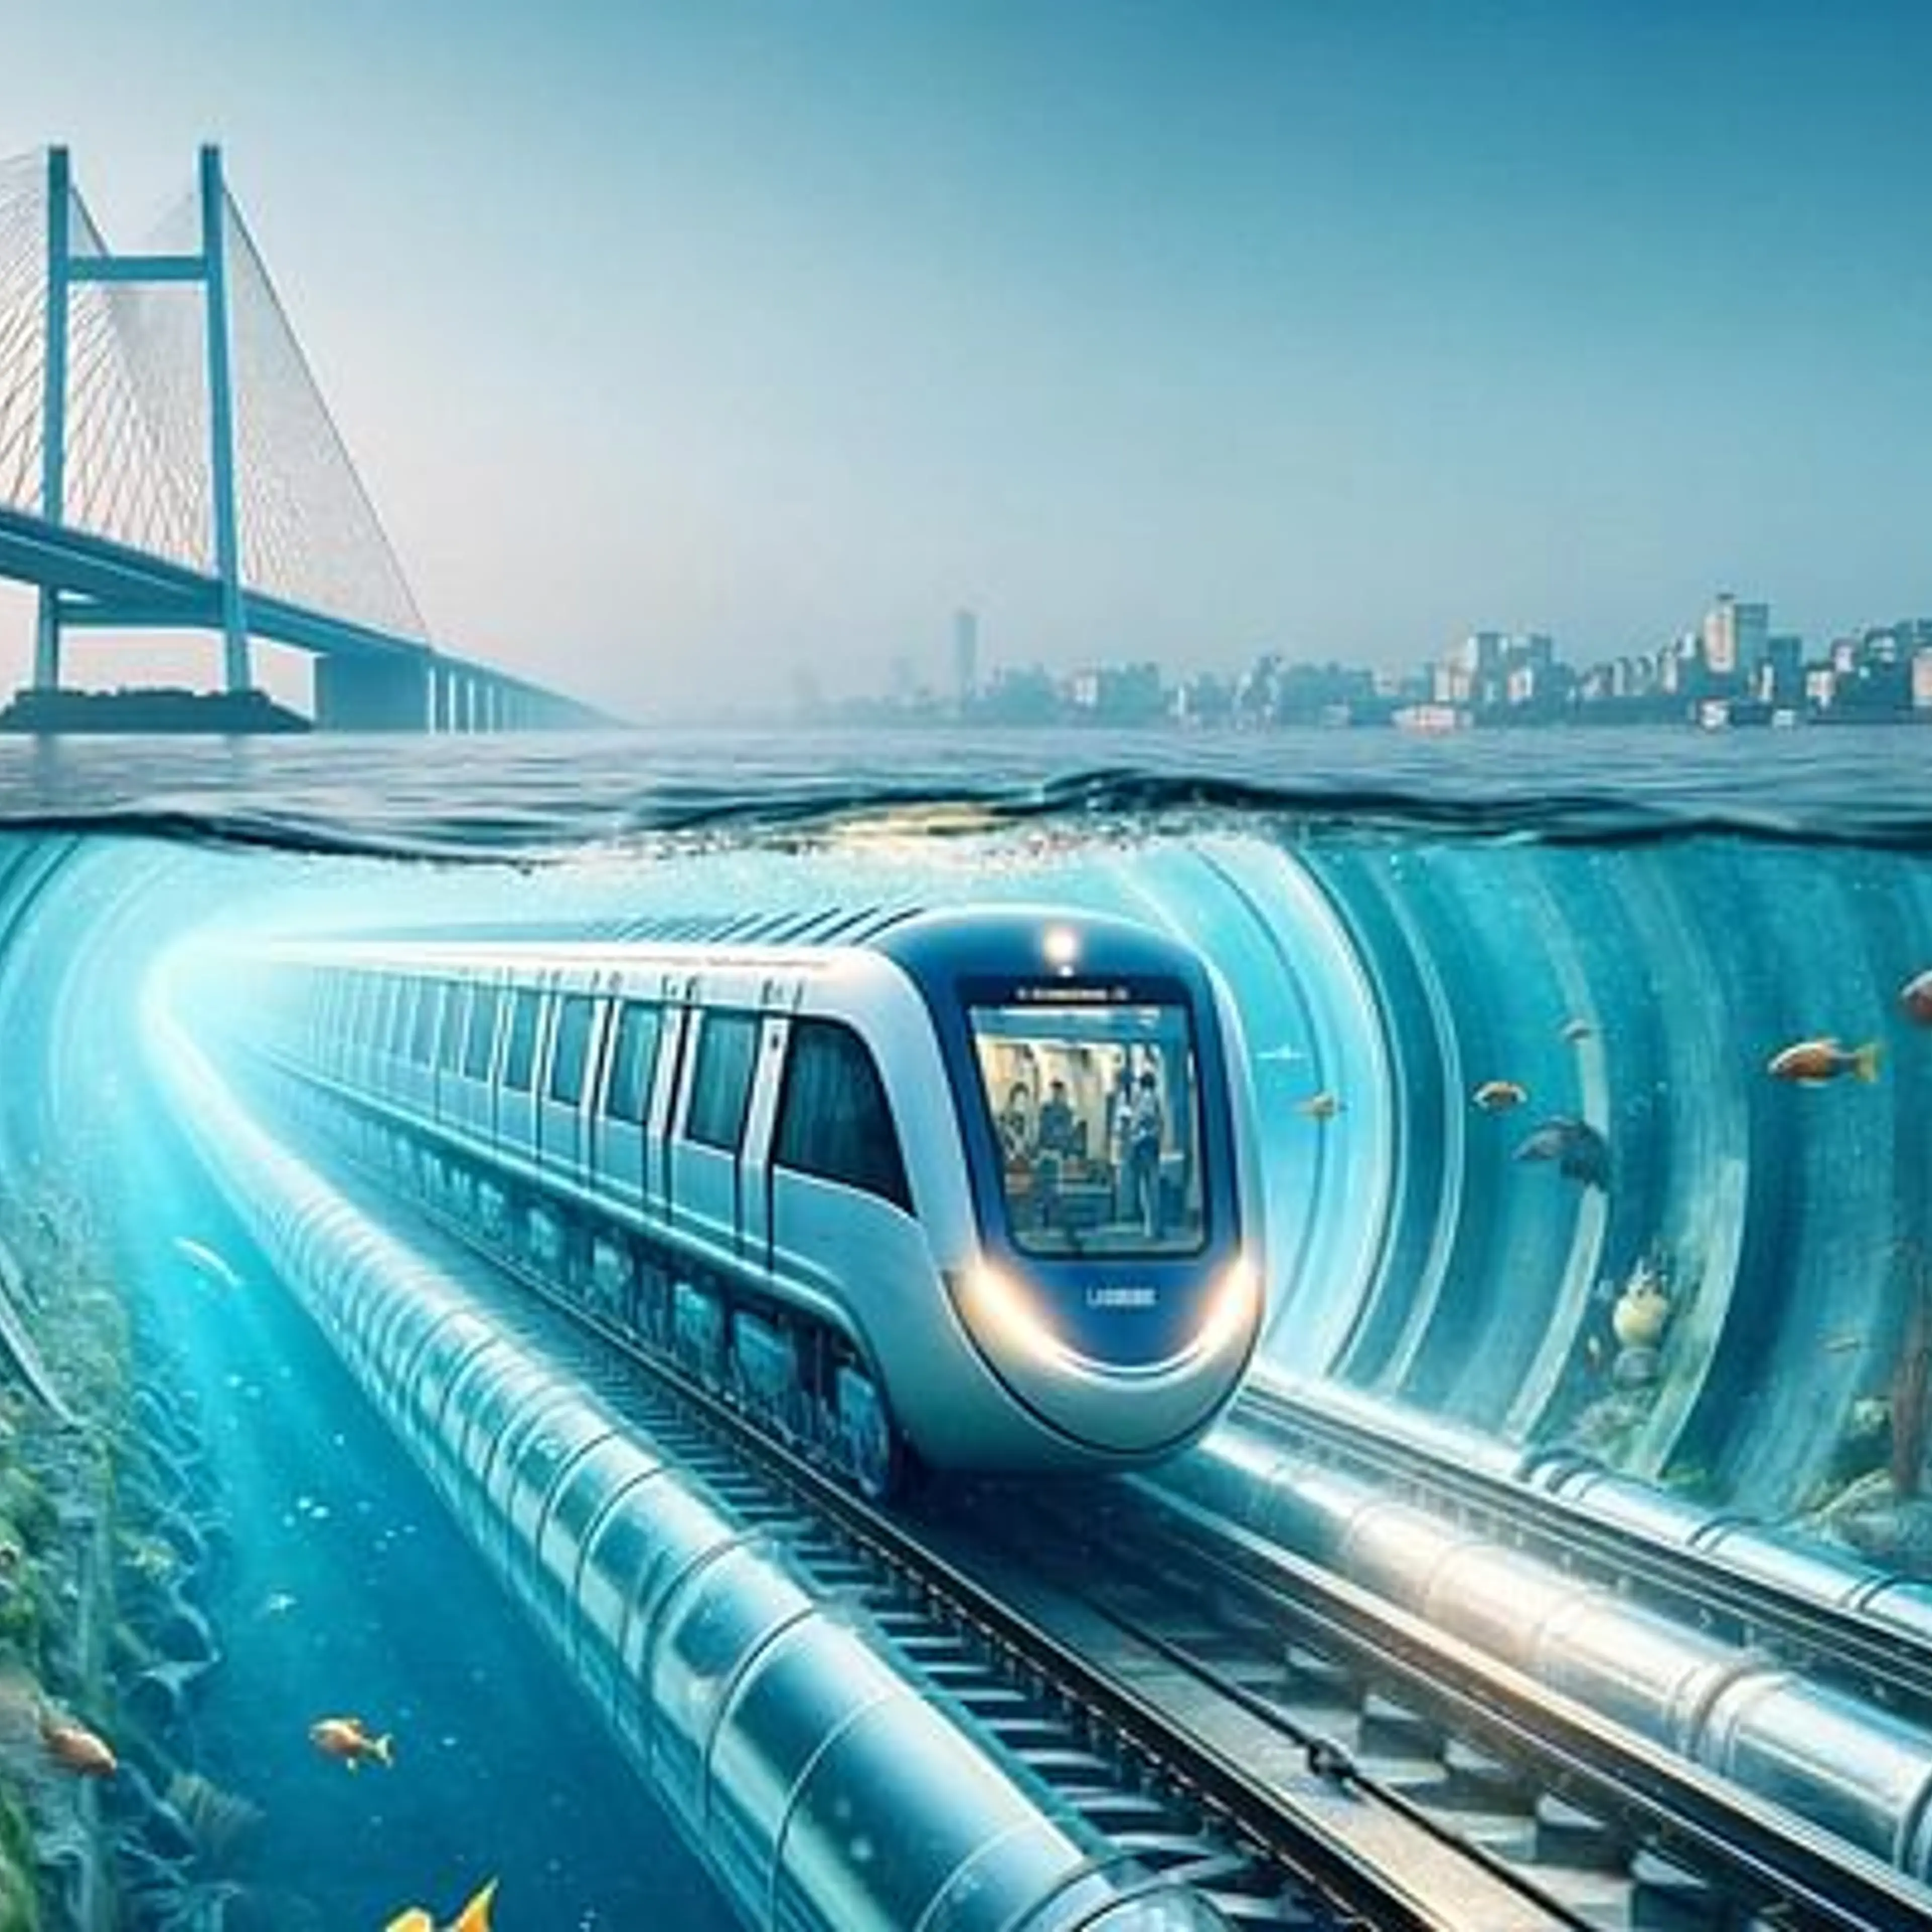 India's first Underwater Metro inaugurated in Kolkata, West Bengal. An enginnering marvel!